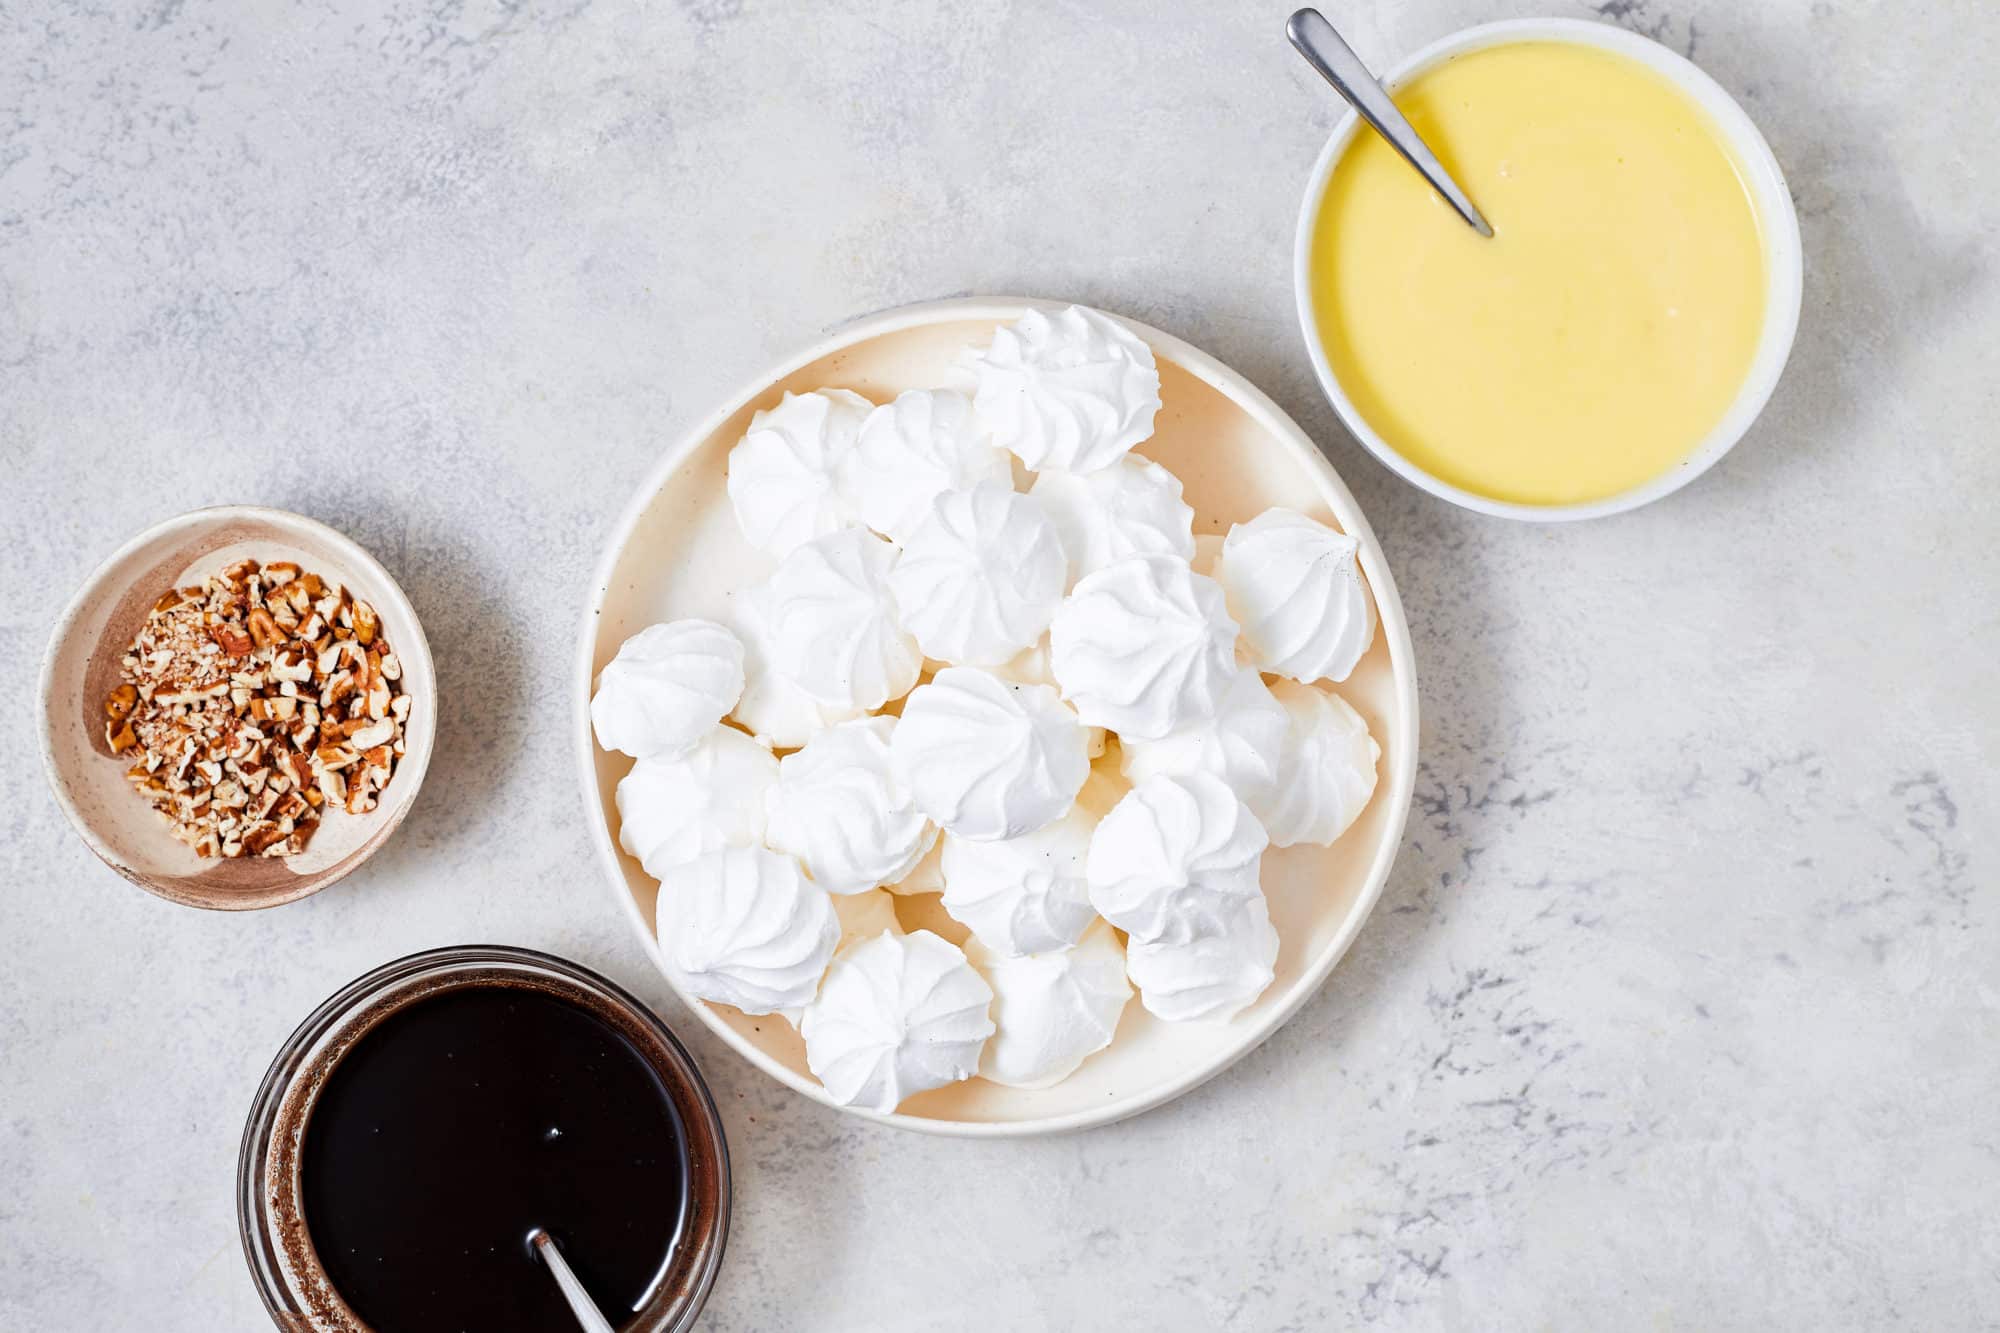 a tan plate filled with meringues with separate dishes on the side filled with custard cream another with melted chocolate glaze and a third with chopped pecans.